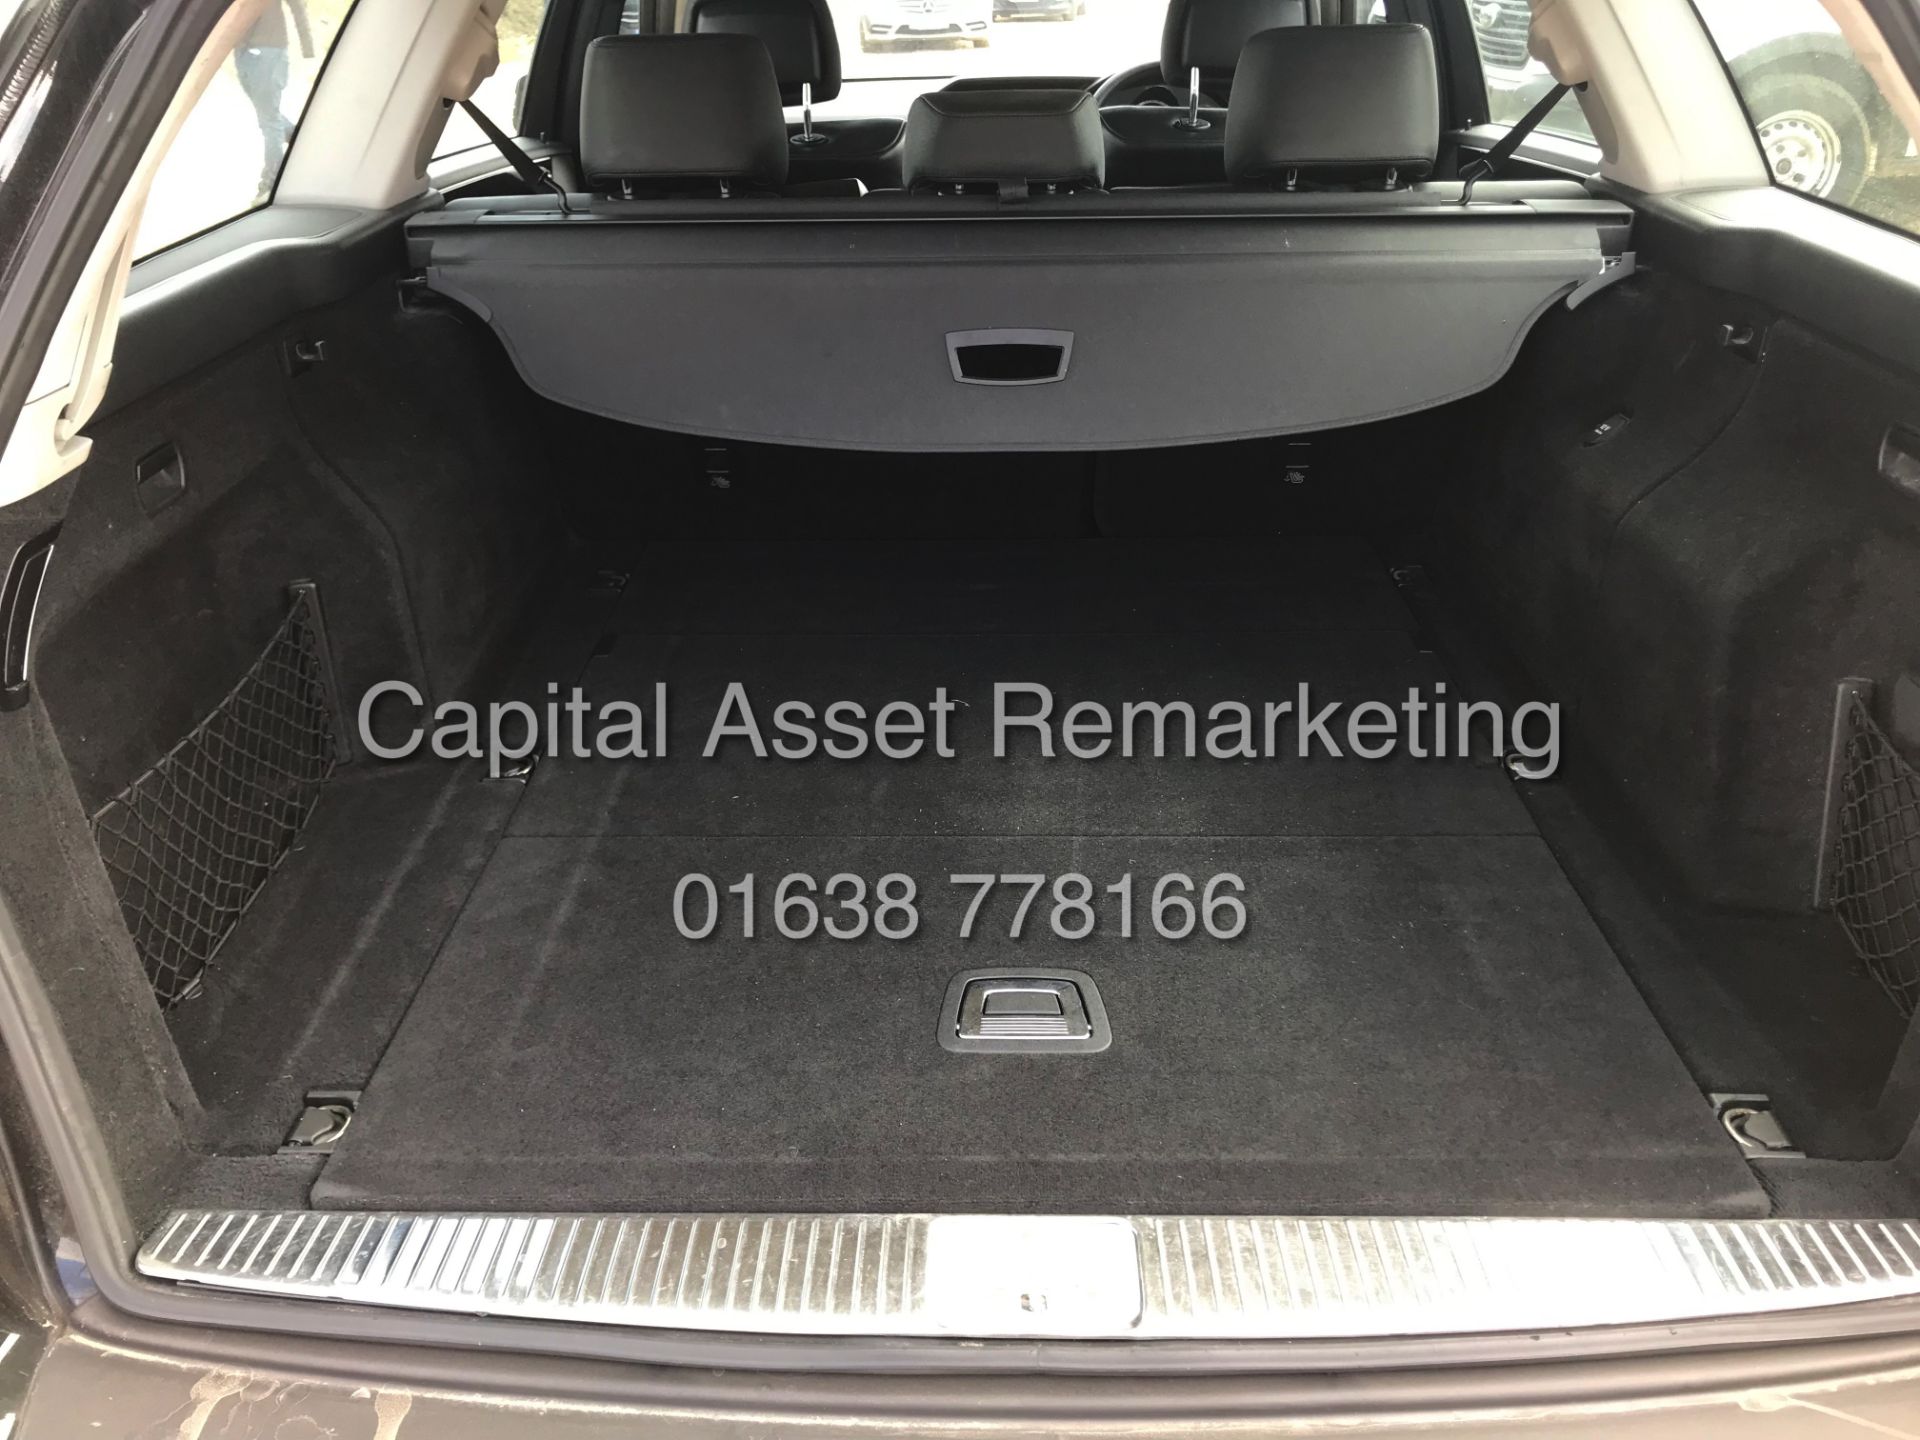 MERCEDES E220d 7G AUTO "EXECUTIVE - SPECIAL EQUIPMENT" SAT NAV - LEATHER - CLIMATE - CRUISE - Image 19 of 20